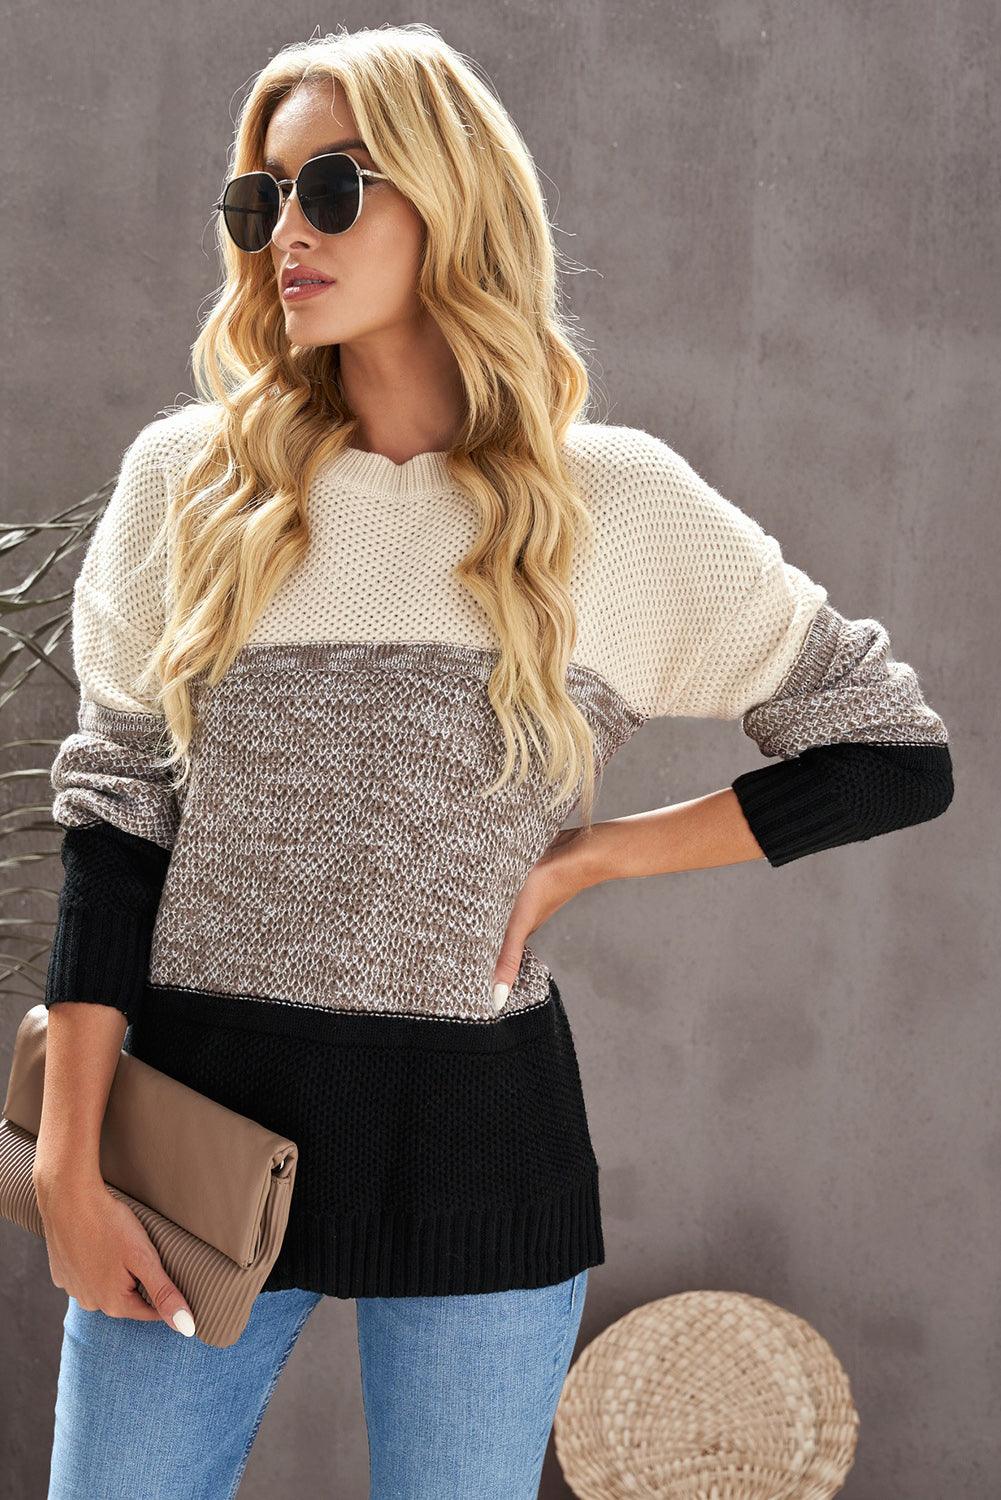 Gray Color Block Netted Texture Pullover Sweater - L & M Kee, LLC